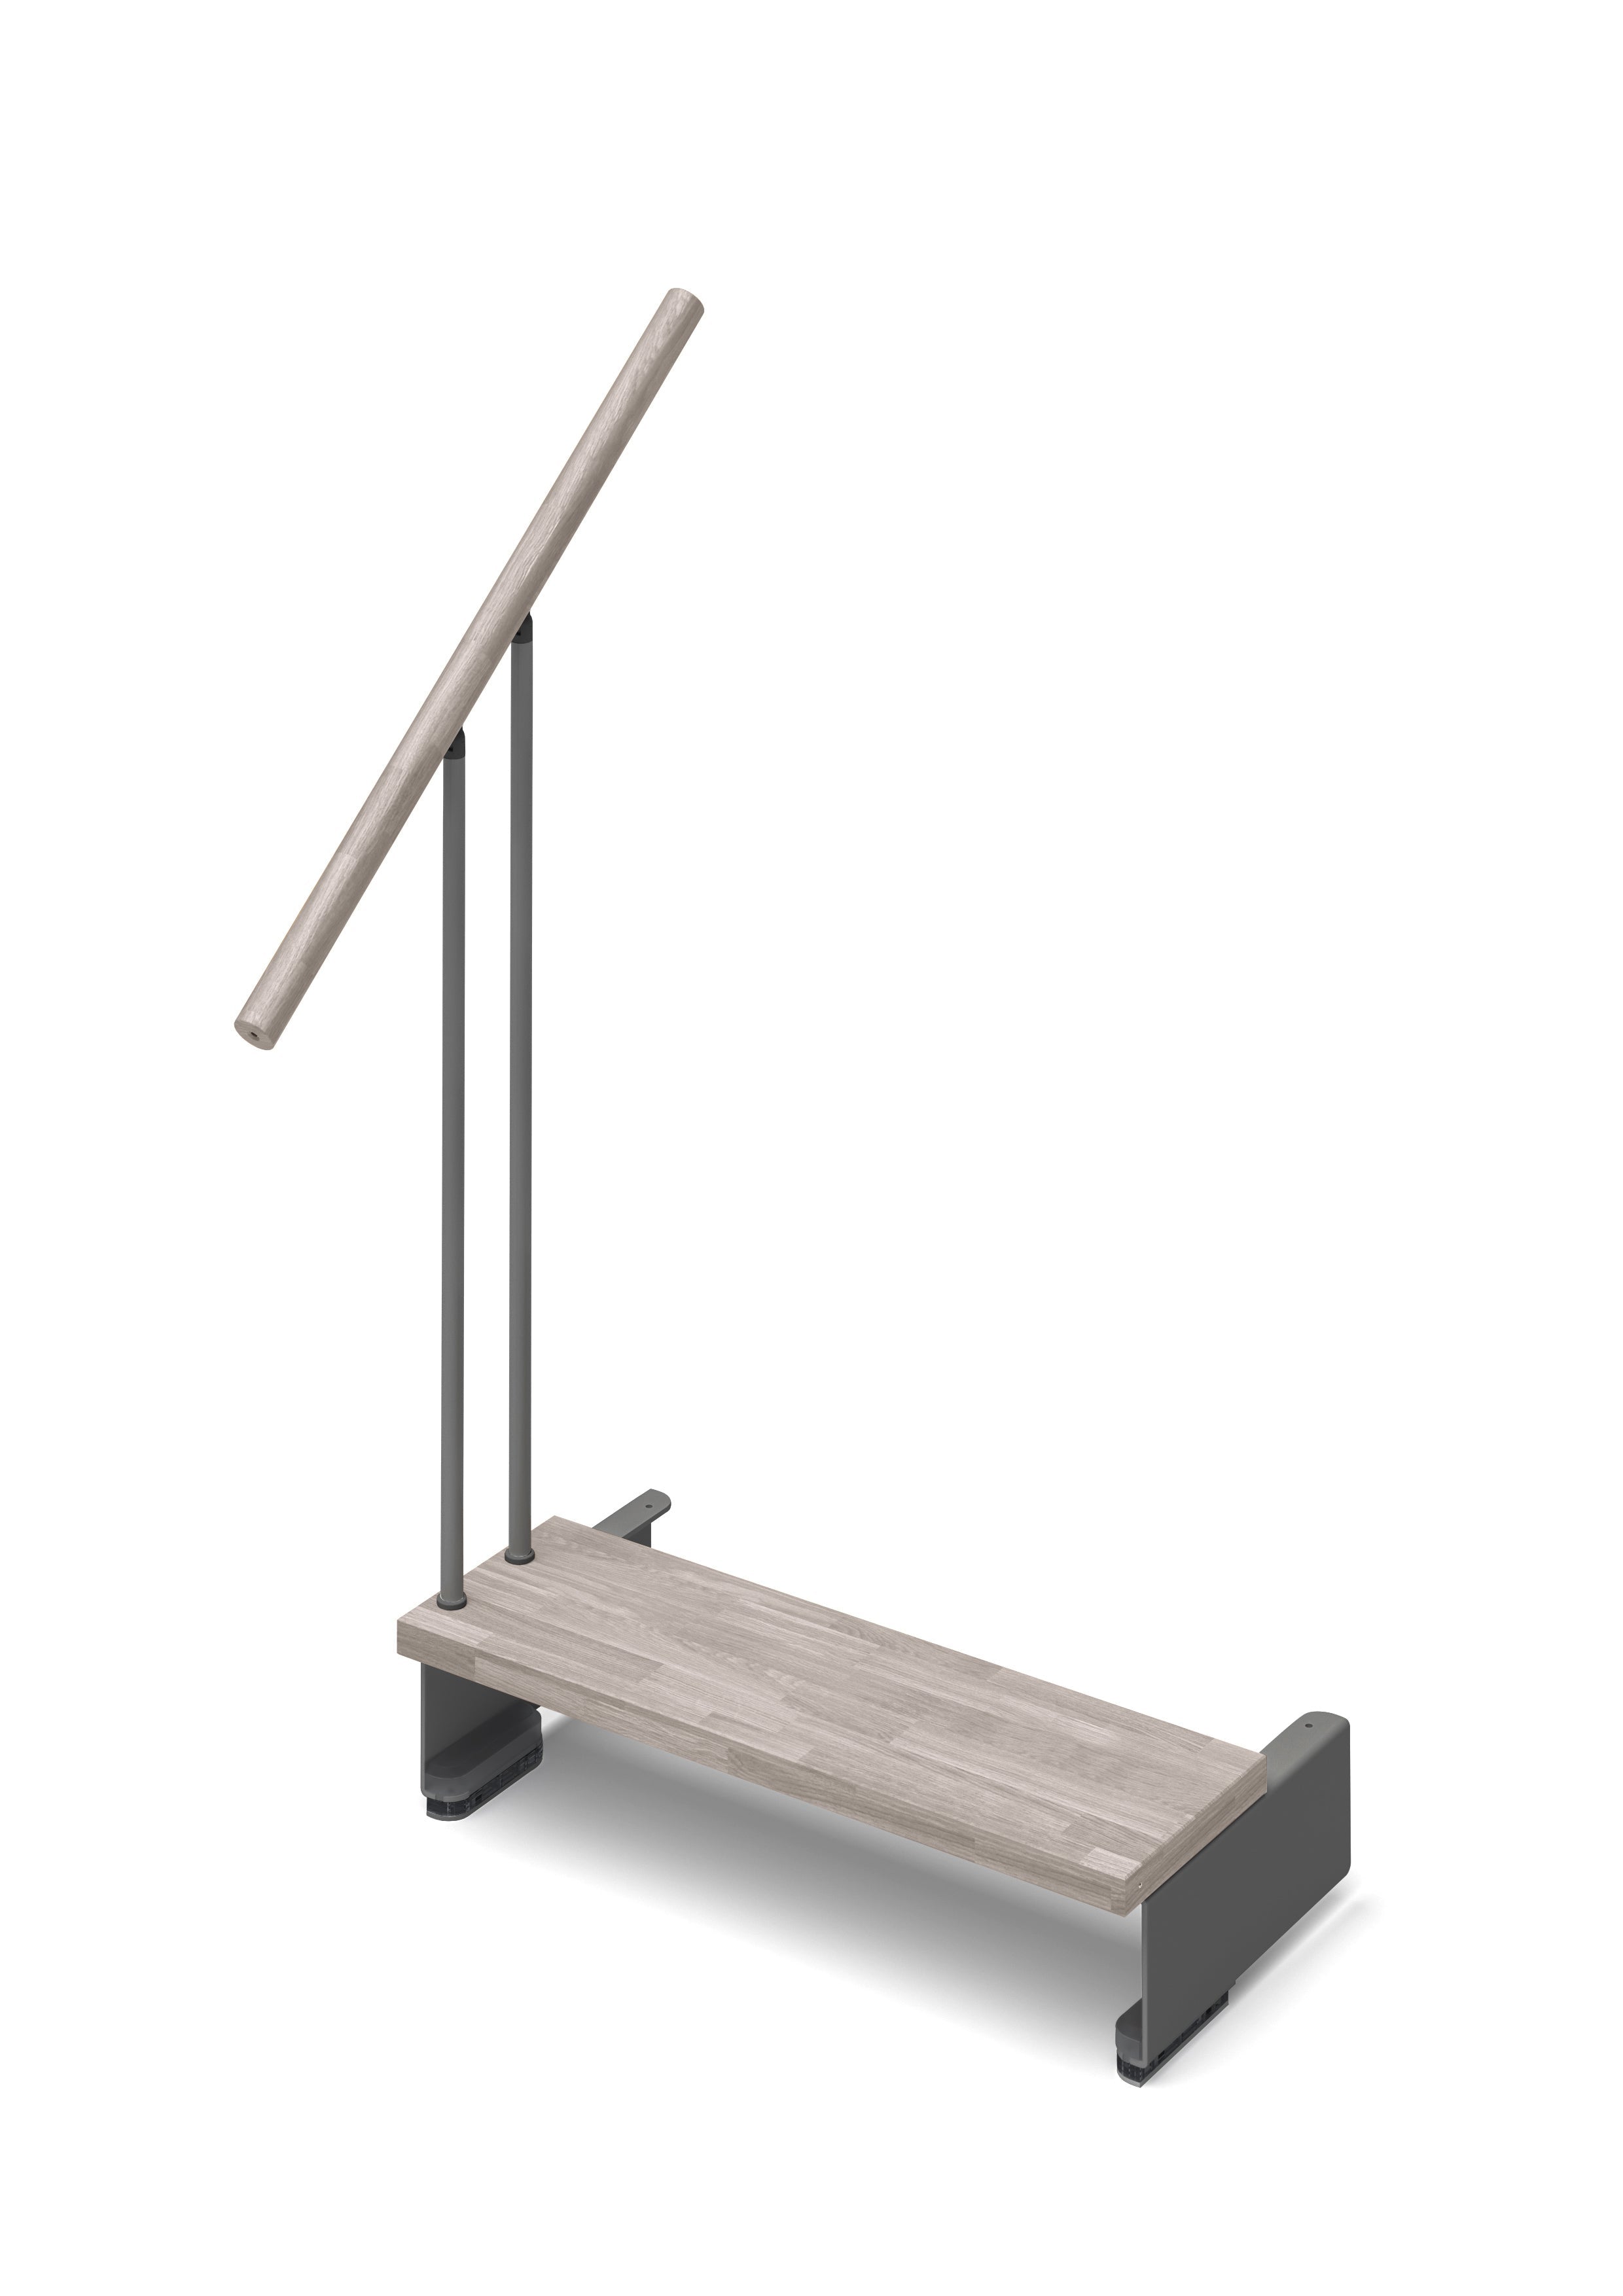 Additional step Adapta 74cm (with structure and railing) - Taupe 87